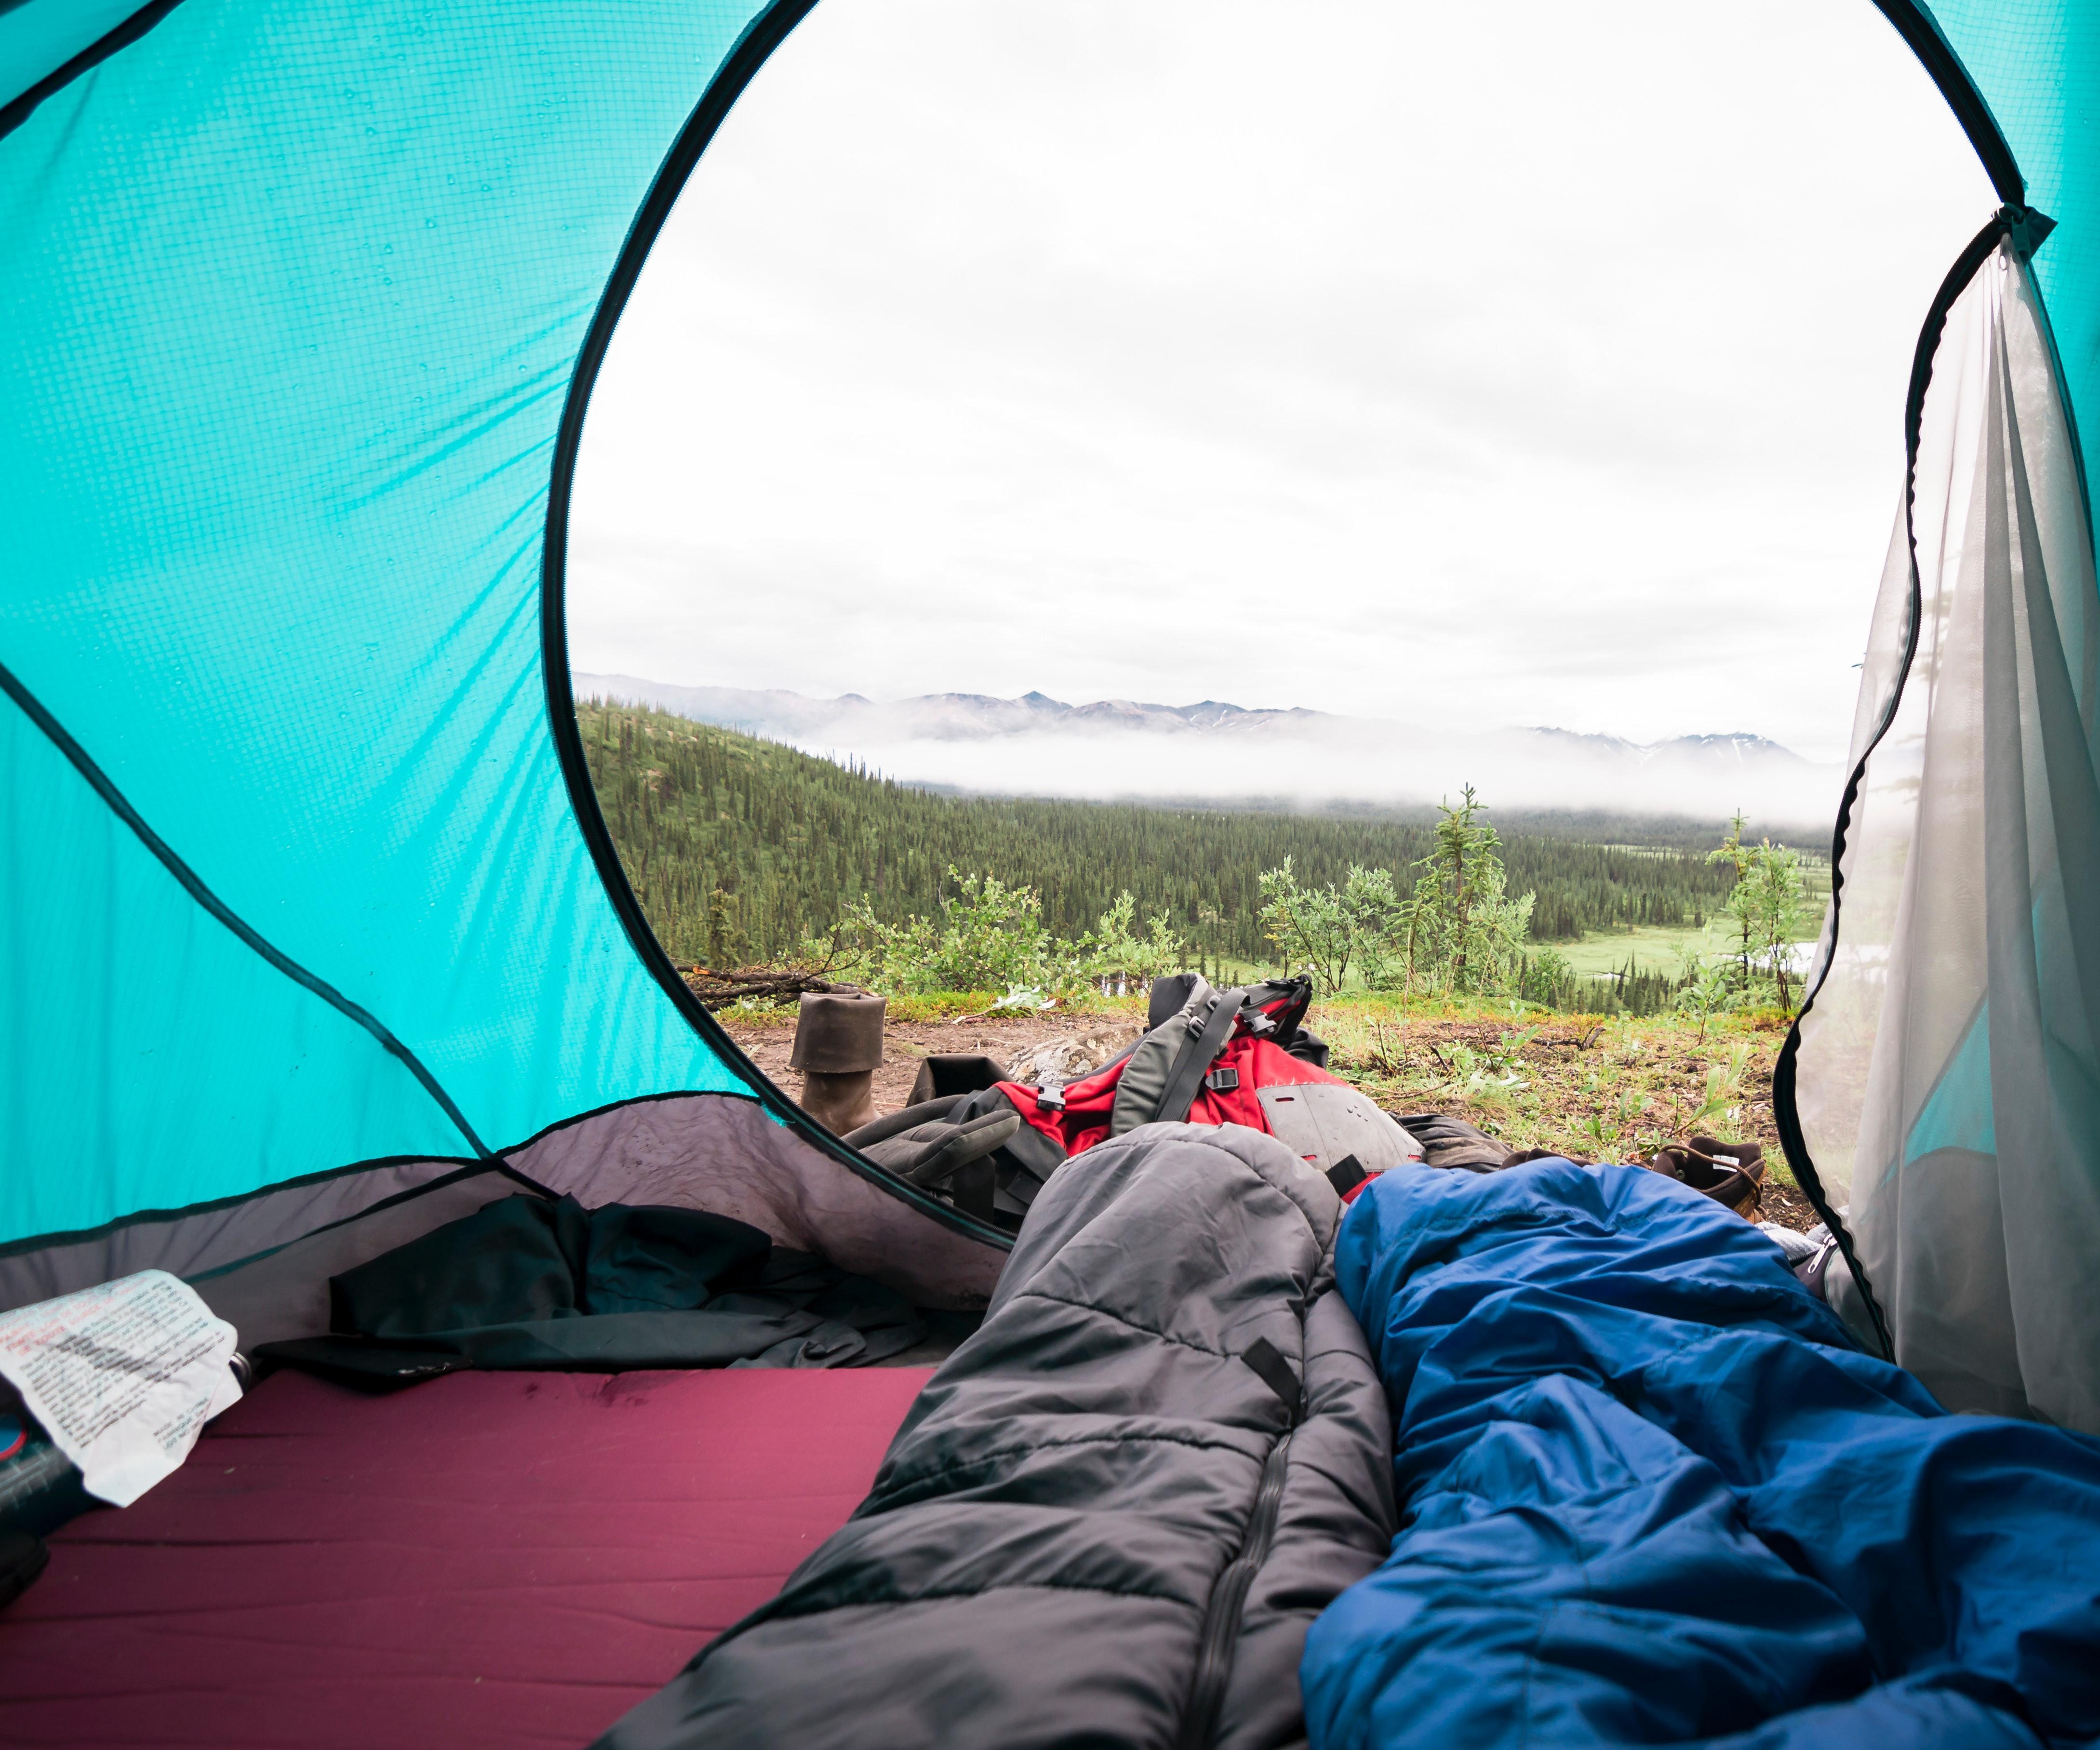 How to Choose and Use a Sleeping Bag